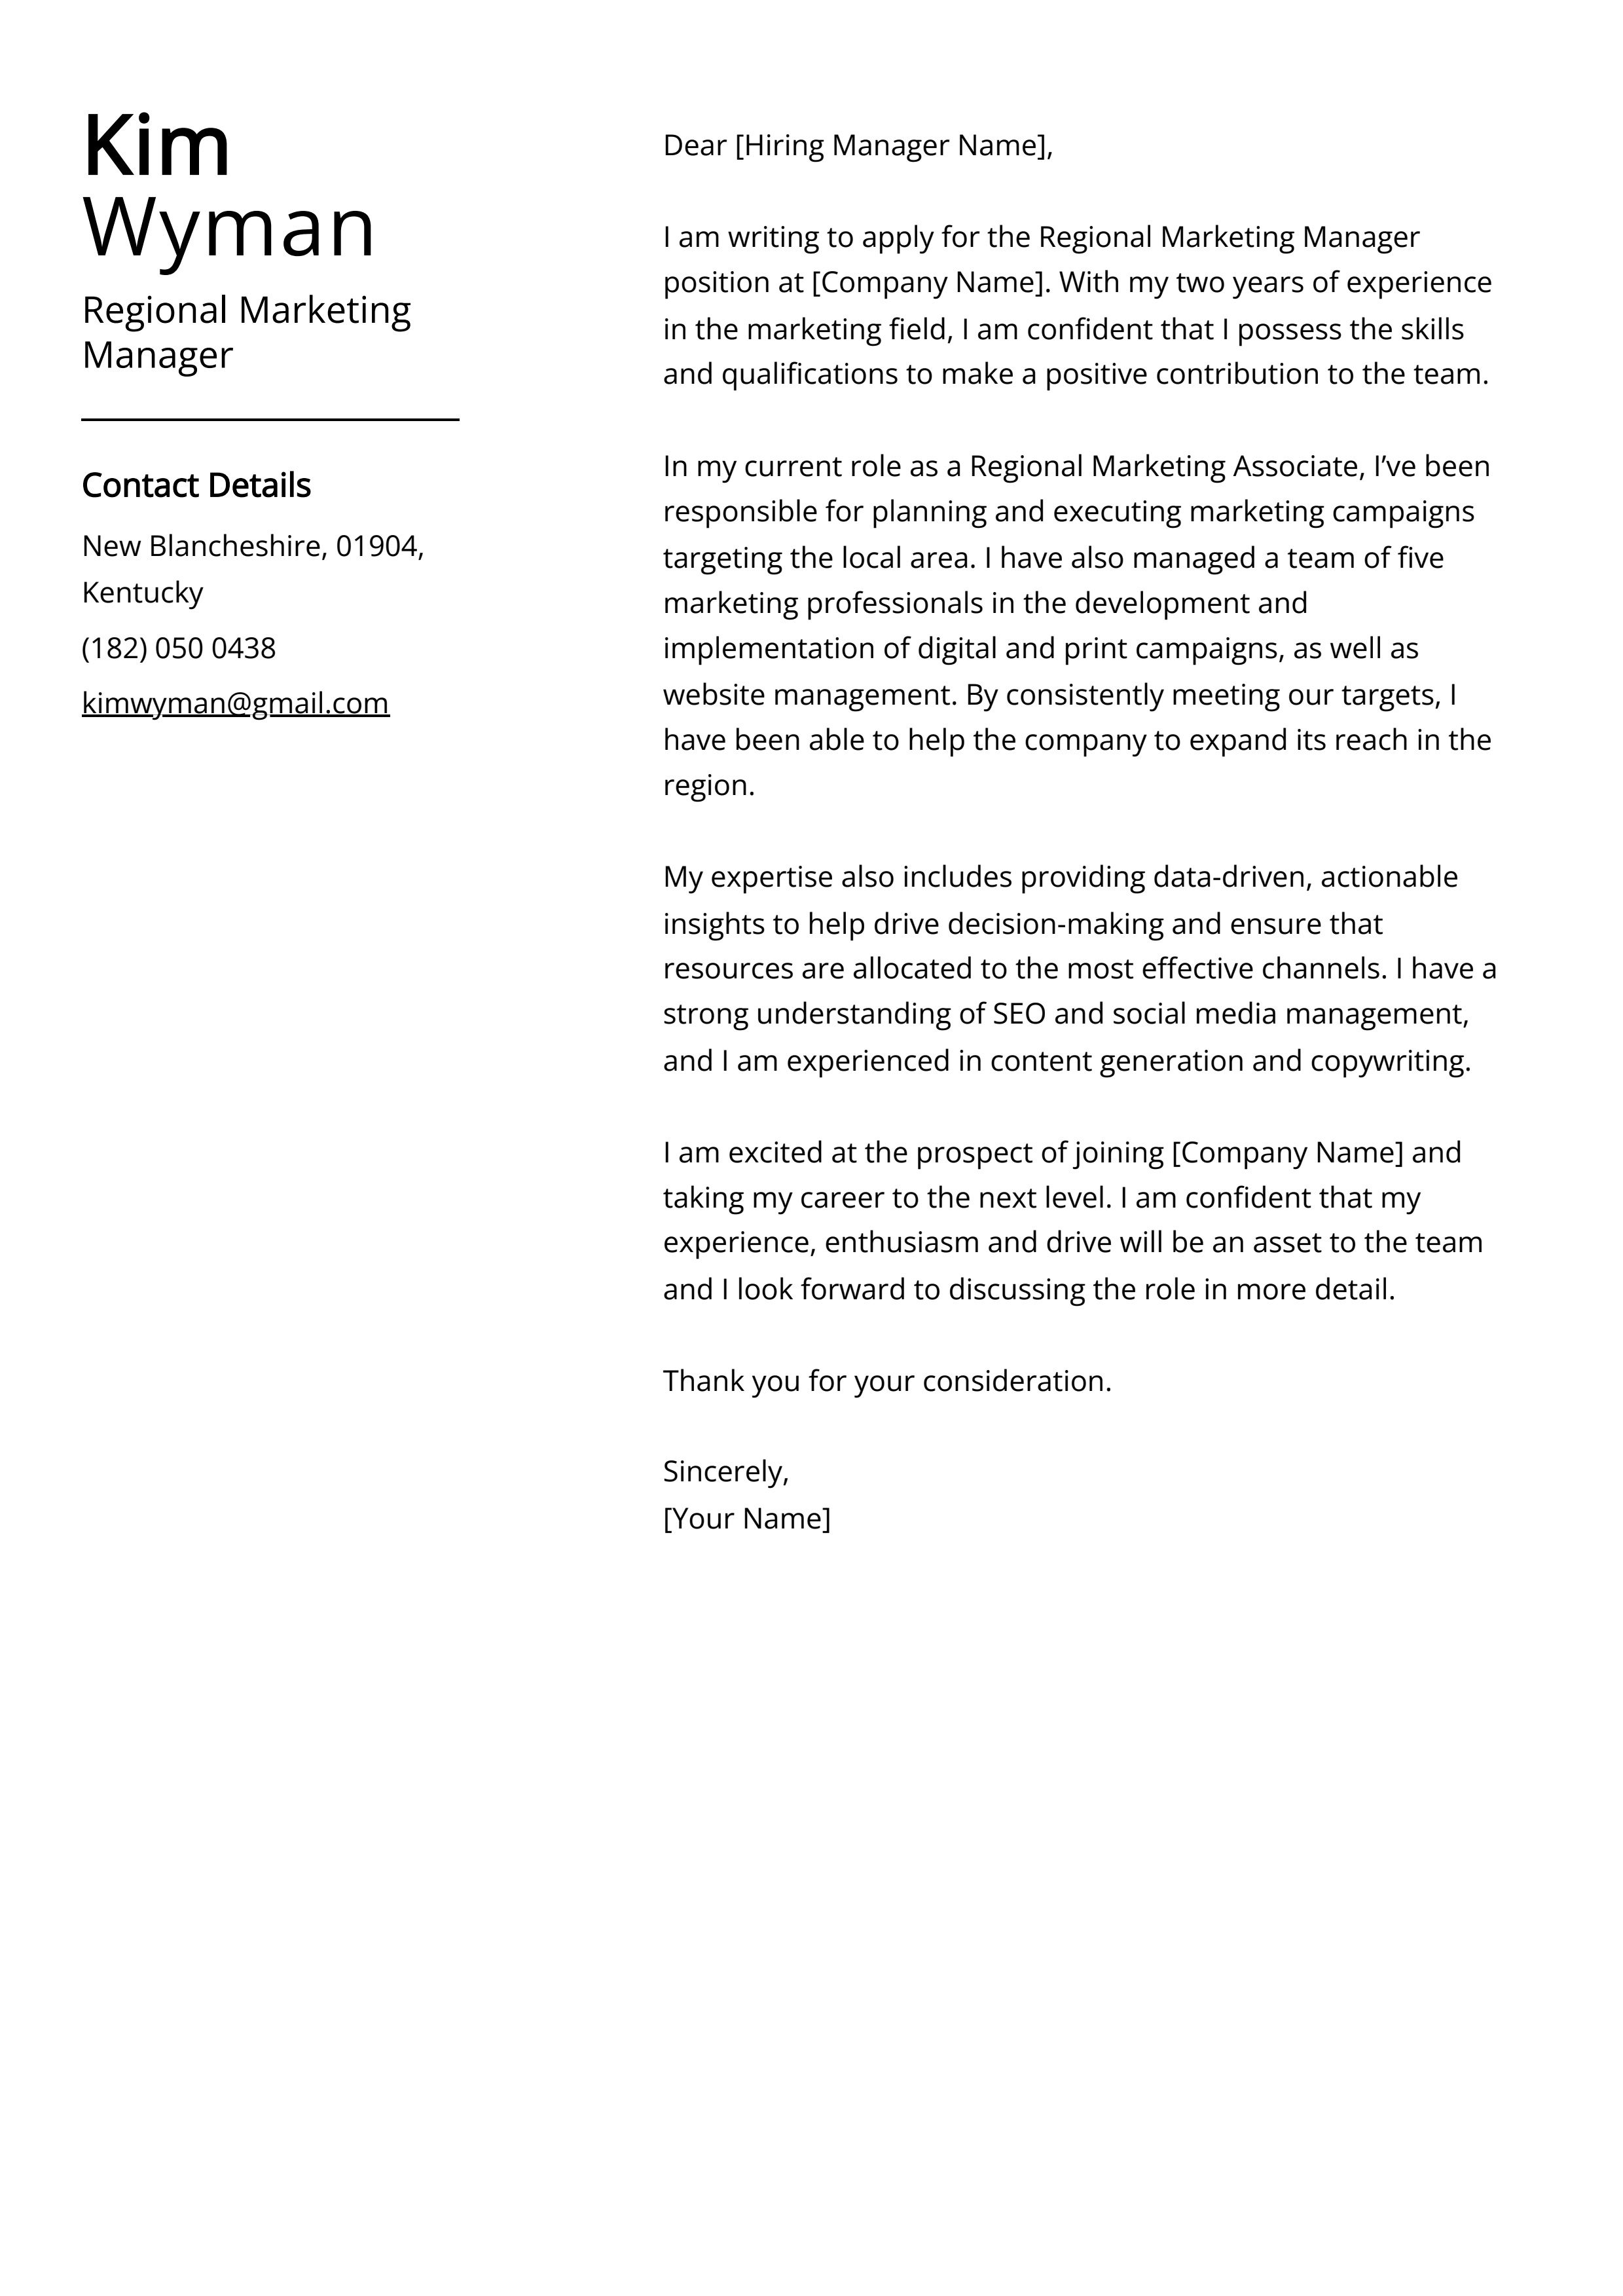 Regional Marketing Manager Cover Letter Example